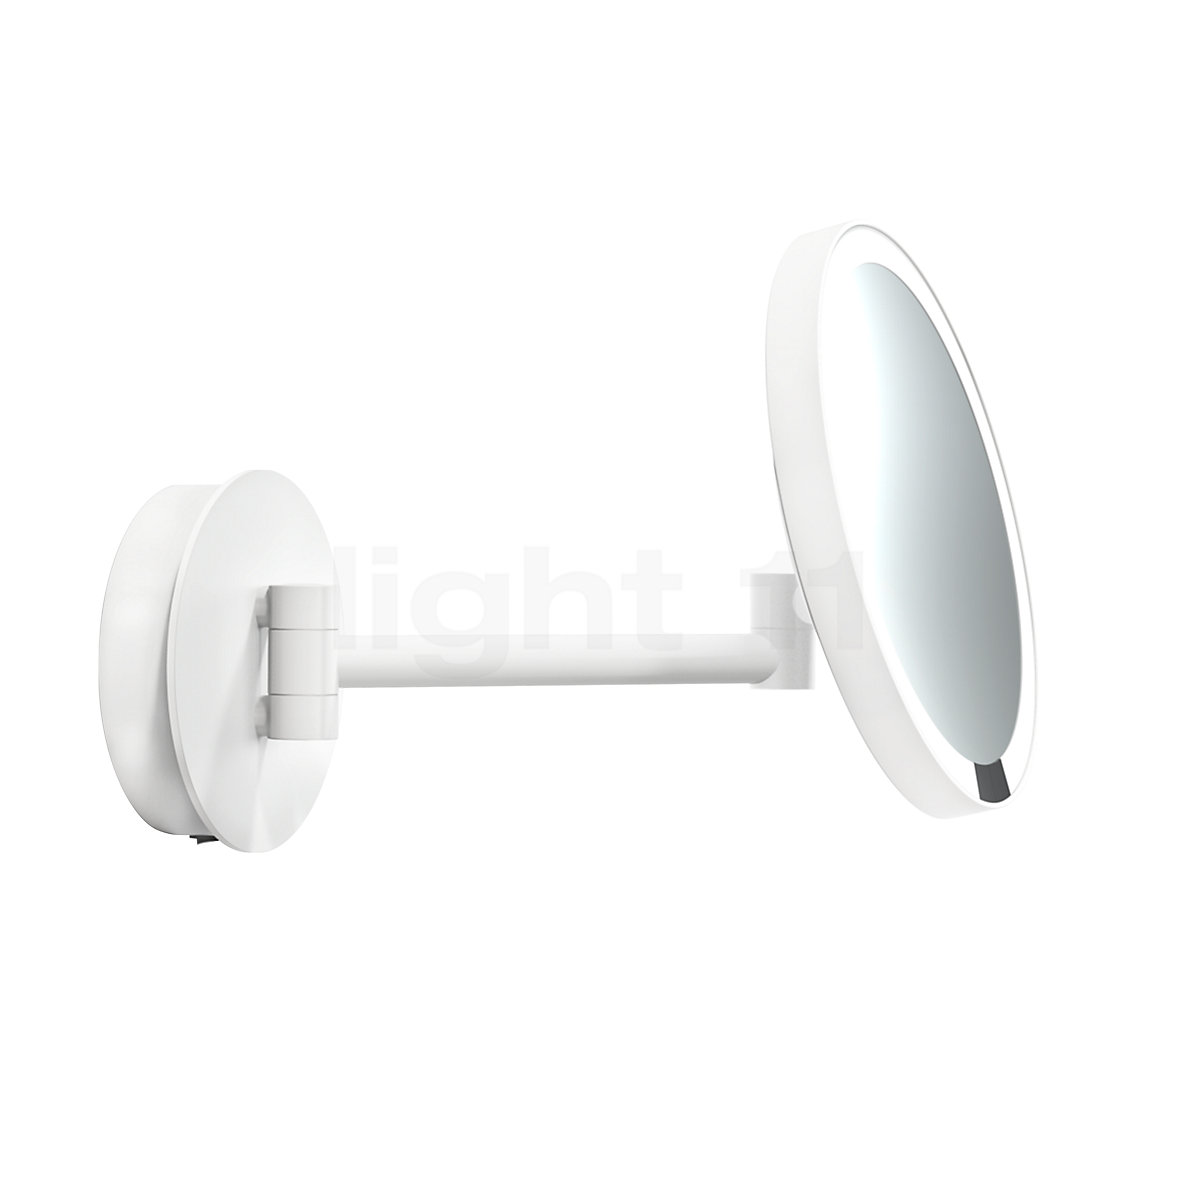 Romanschrijver definitief verkorten Buy Decor Walther Just Look Wall-Mounted Cosmetic Mirror LED with direct  mains connection at